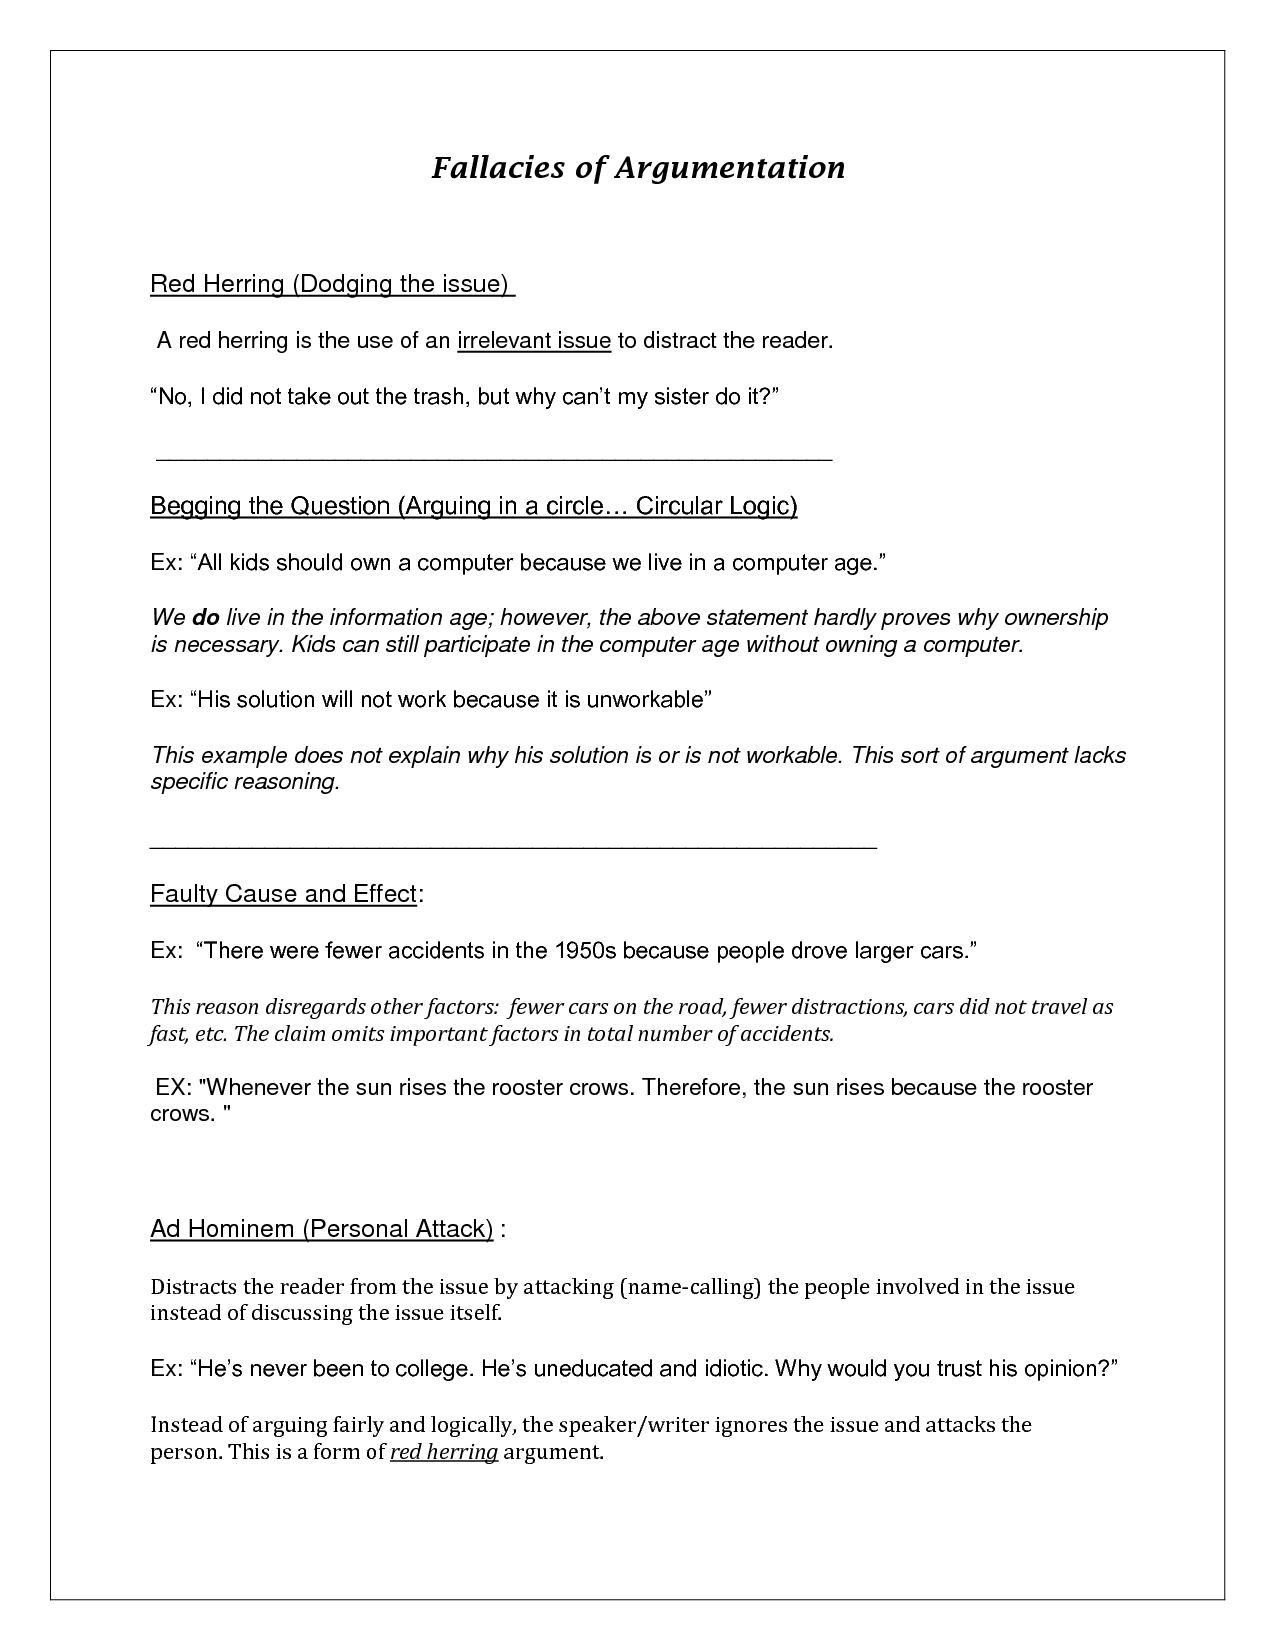 13-best-images-of-fallacy-worksheets-and-answer-keys-gas-laws-worksheet-answer-key-logical